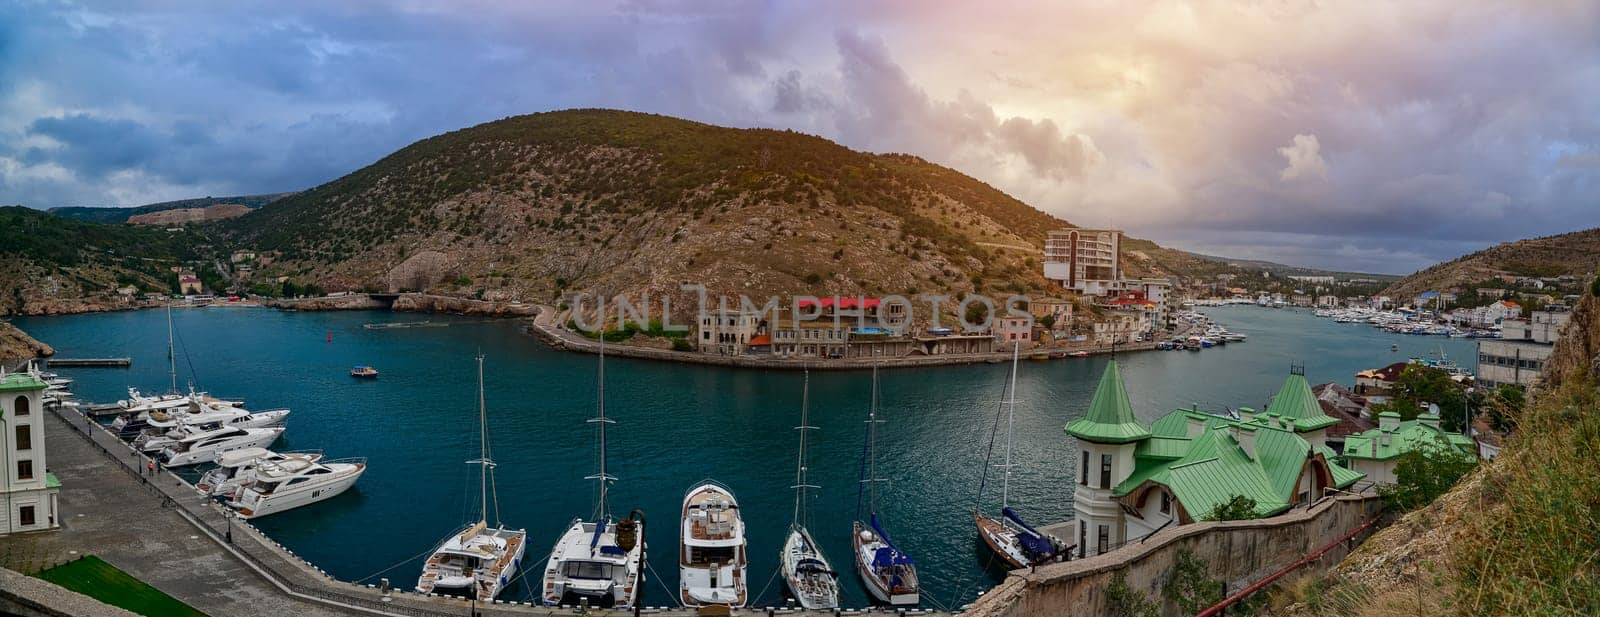 Panoramic view of the city from above. Balaclava. Crimea. Ukraine. September 15, 2013. by Renisons